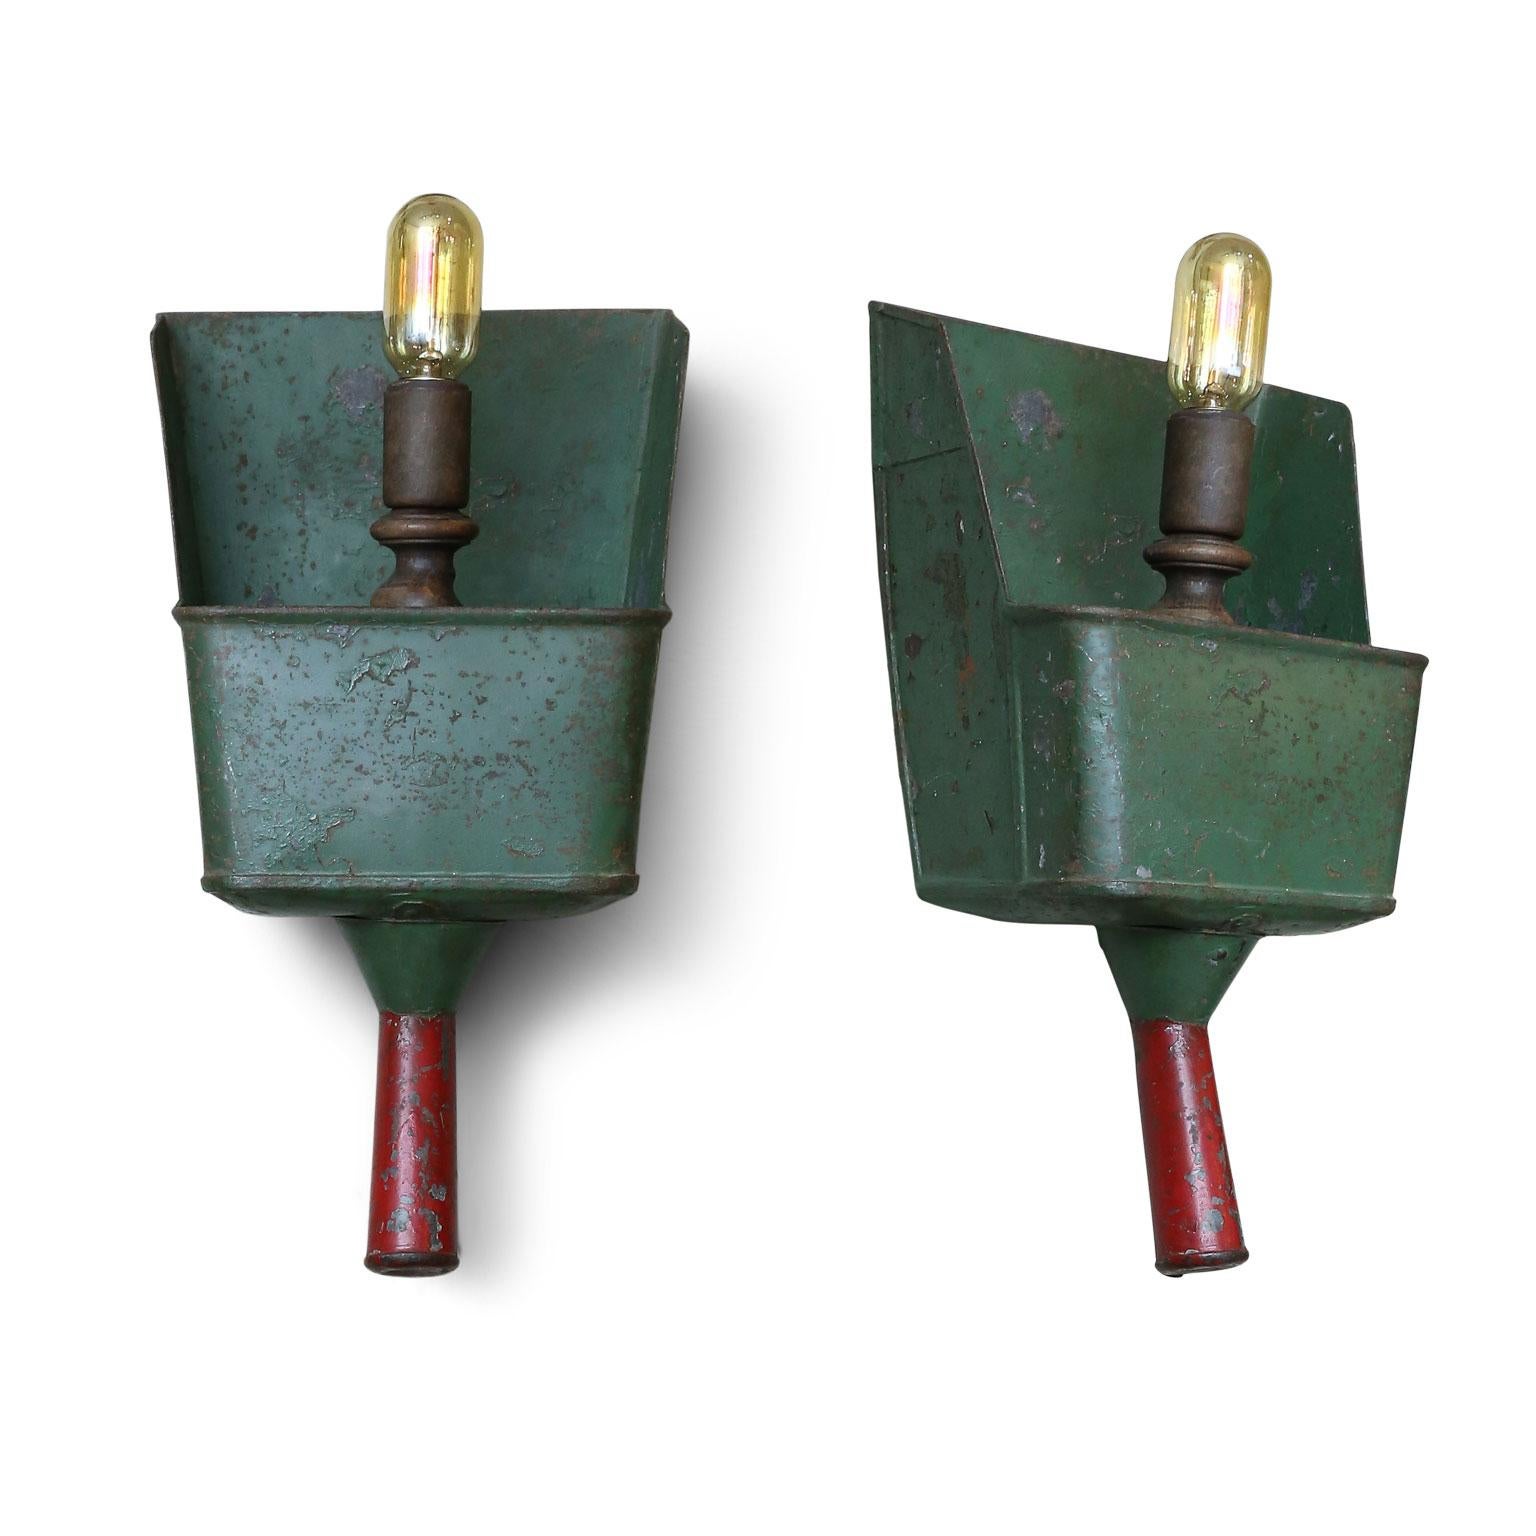 These sconces are surely unique and could be interesting for a rustic or primitive interior. They are original green and red paint with turned wood socket.
They have been made and newly wired in the US. The scoops themselves are circa 1920 and were